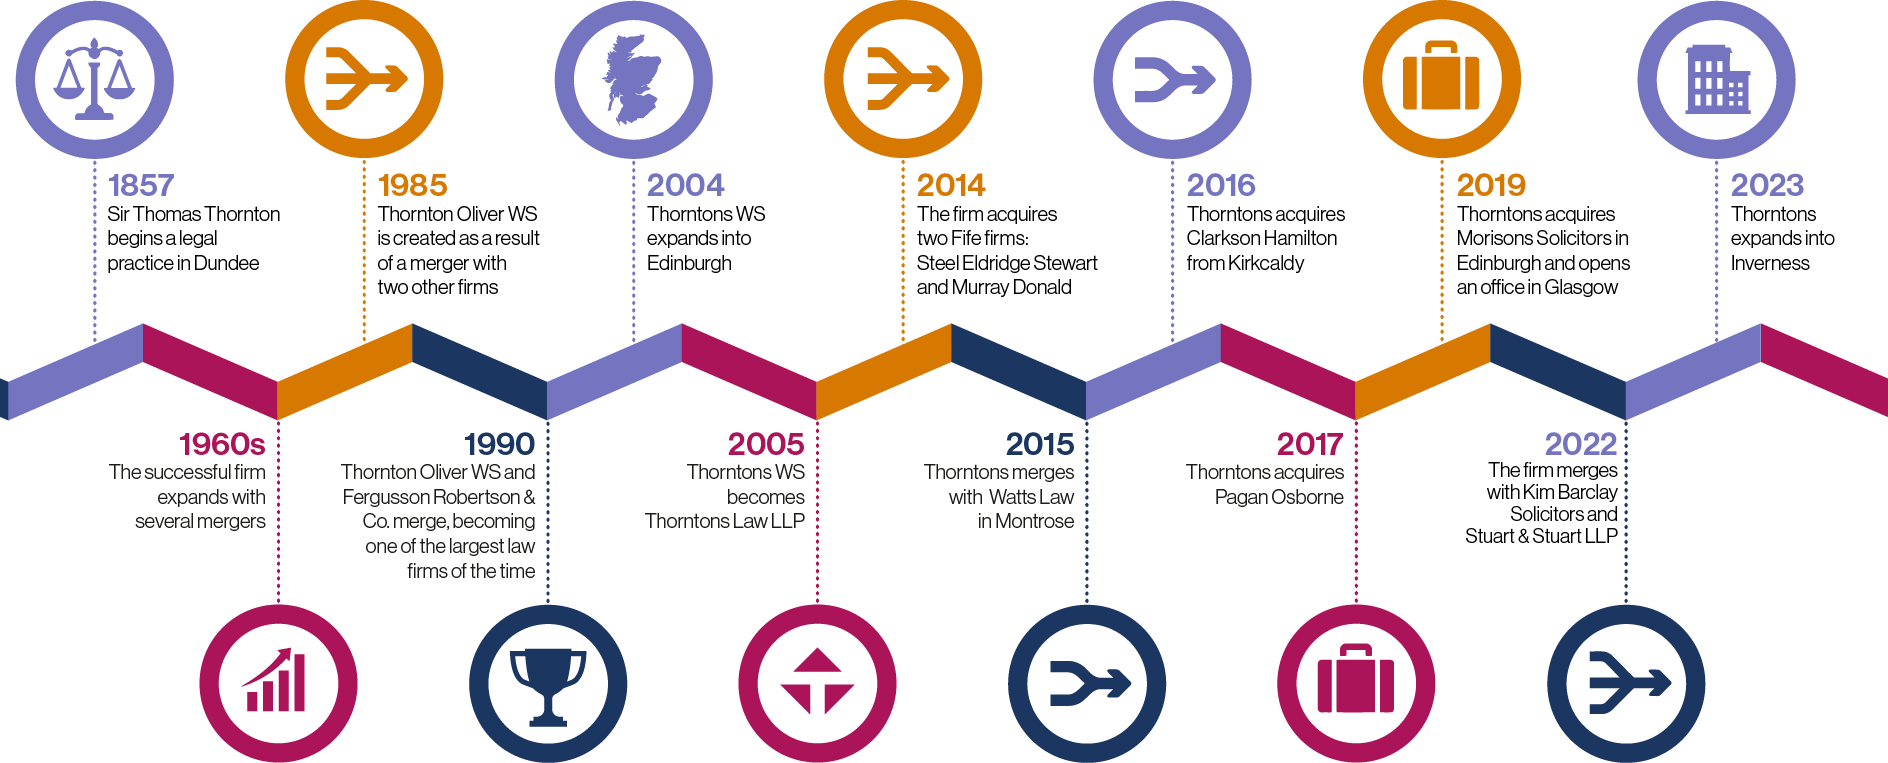 Thorntons Solicitors History and Growth